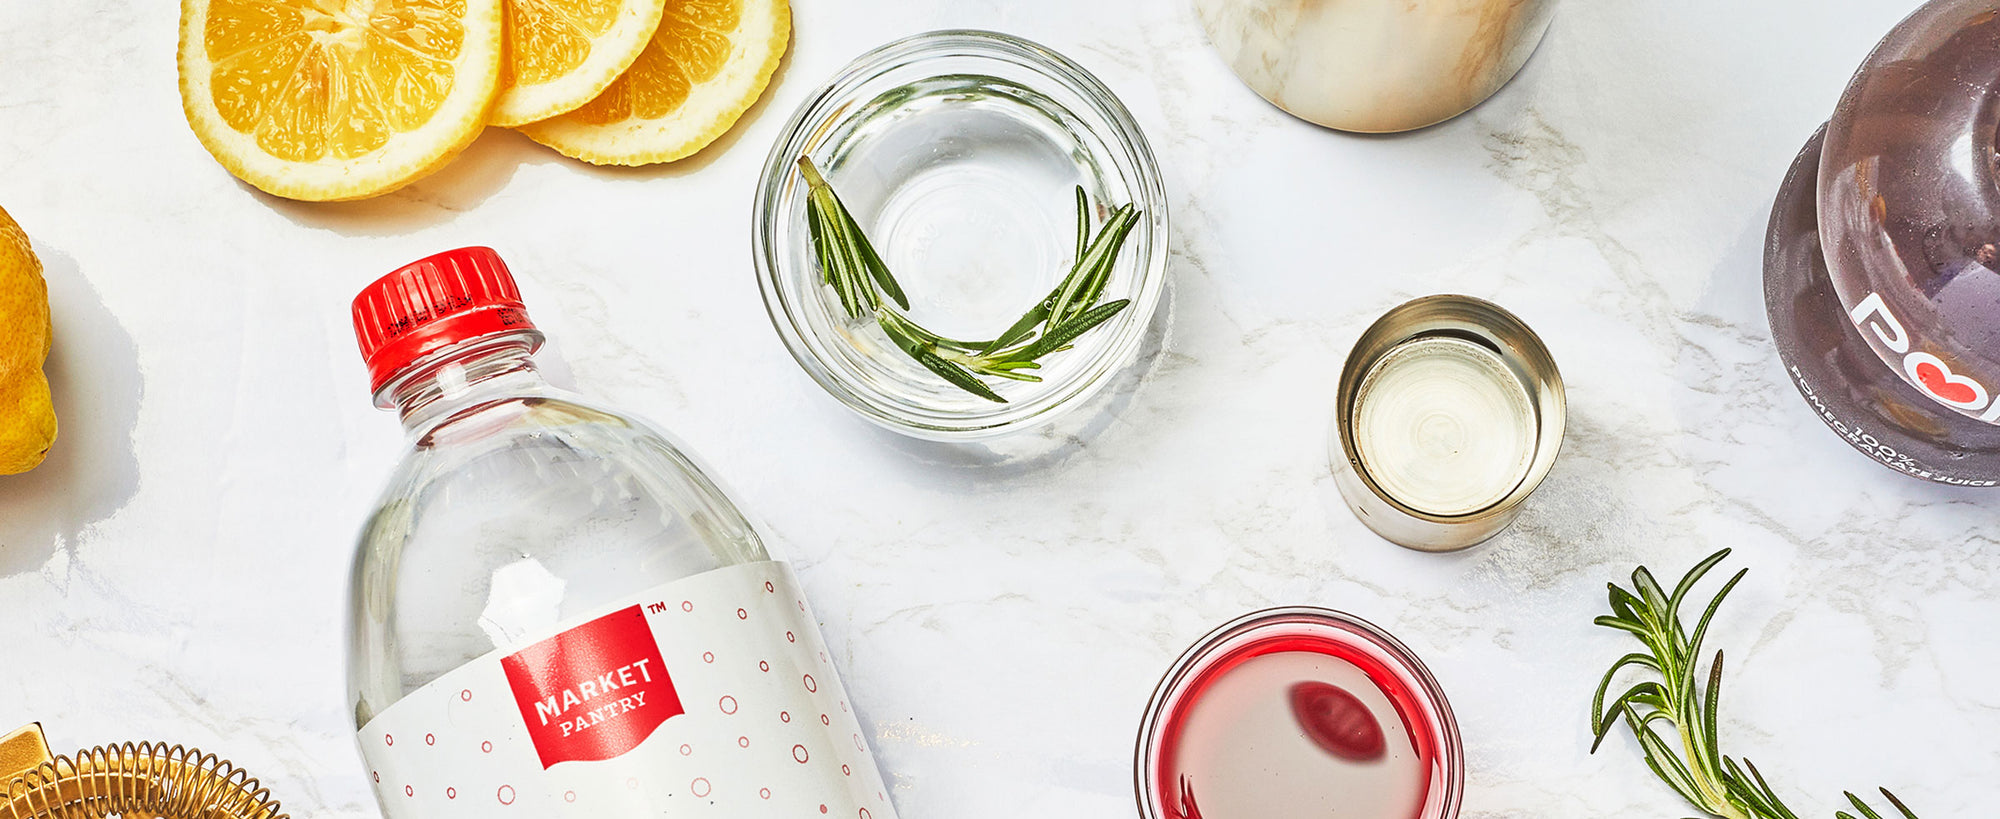 A flat lay image of the Rosemary Pomegranate Cocktail ingredients.